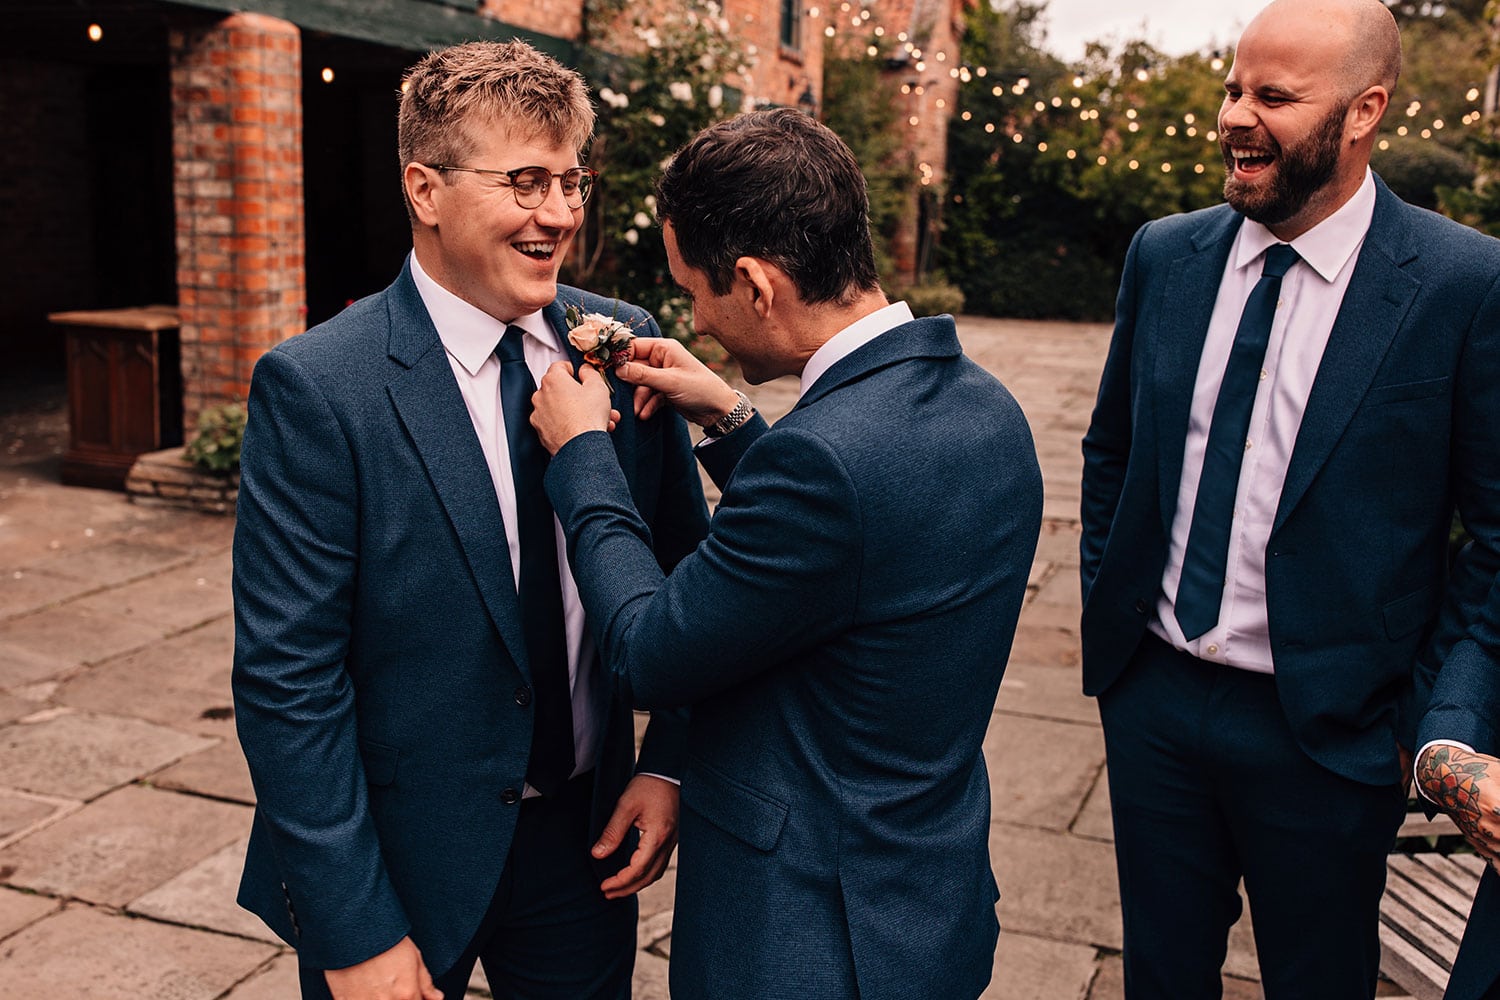 Grooms wedding preparations putting on buttonholes